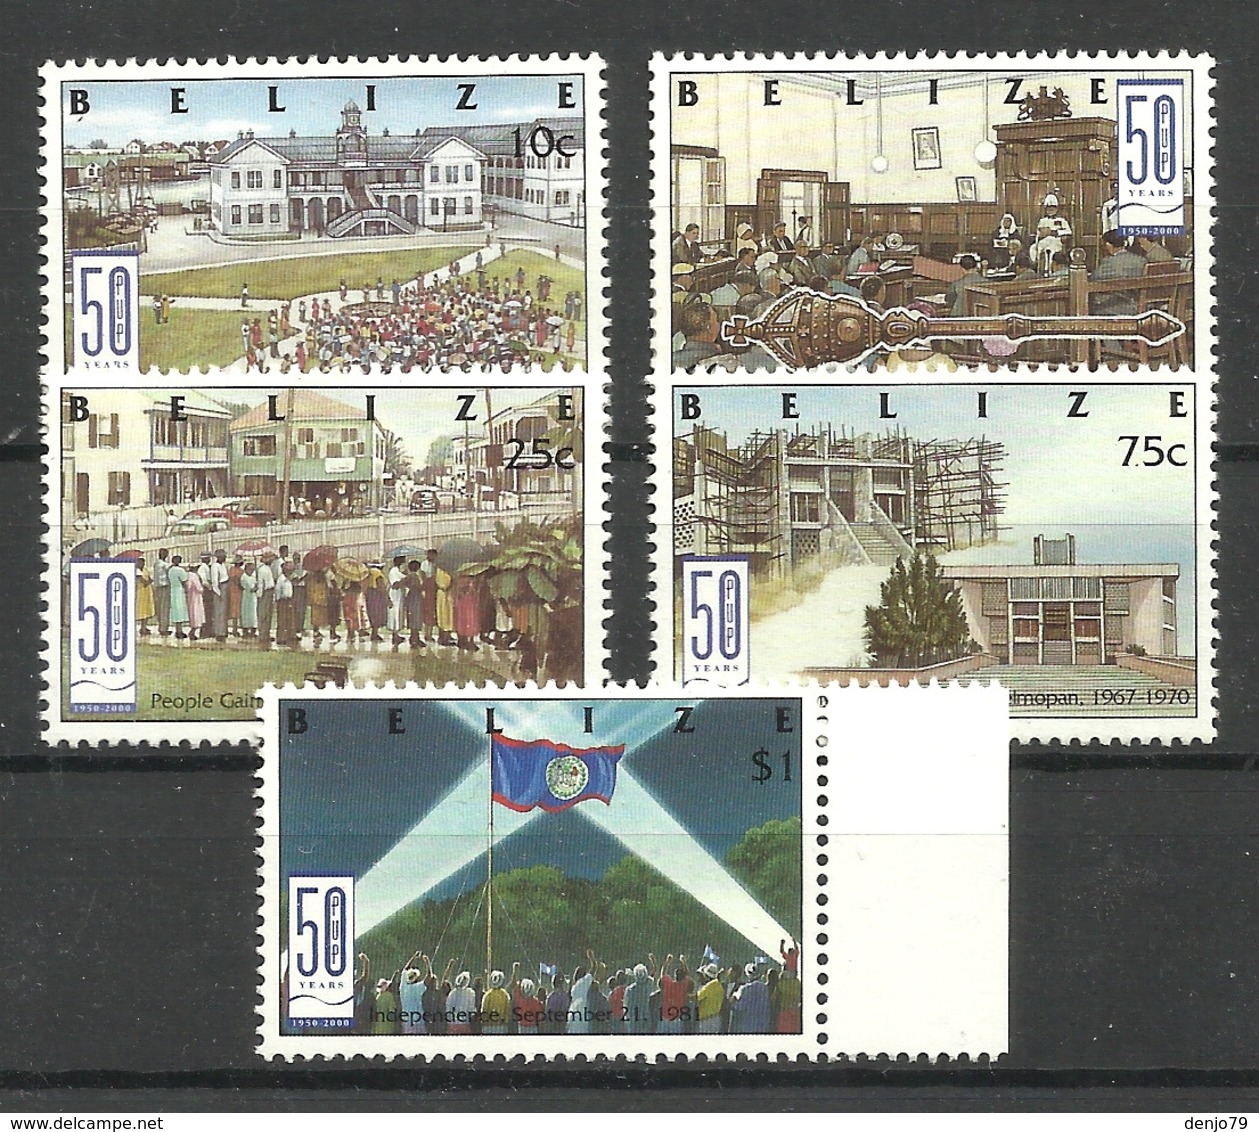 BELIZE 2000 50 YEARS OF PEOPLES UNITED PARTY SET MNH - Belice (1973-...)